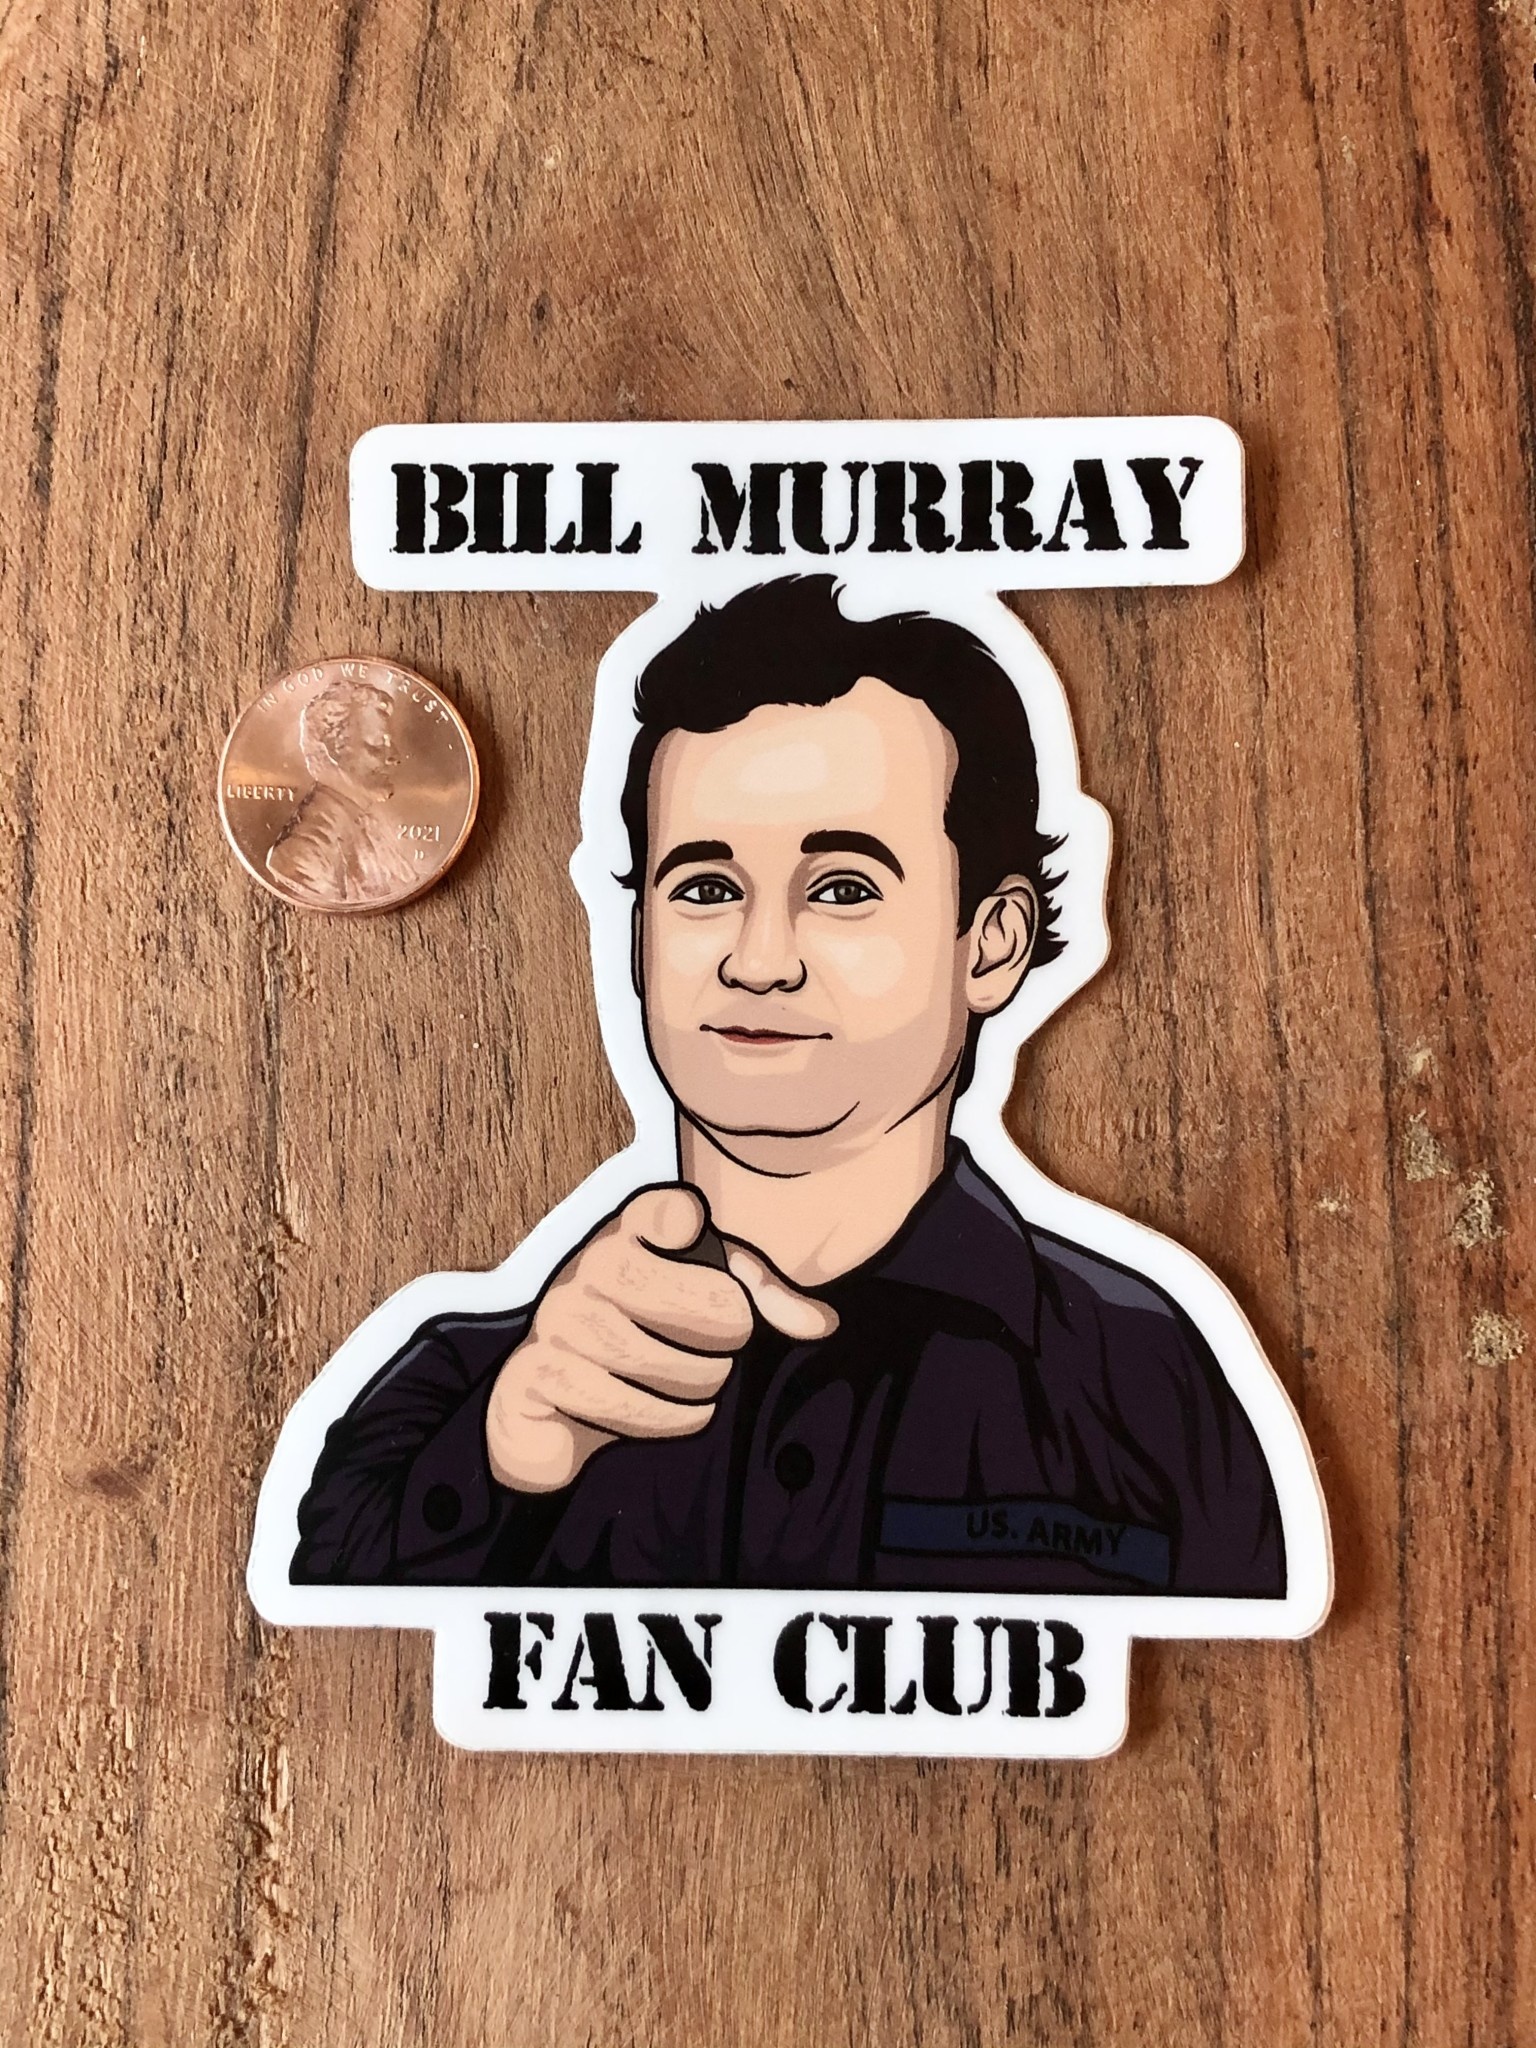 What's His Name Bill Murray Fan Club Sticker